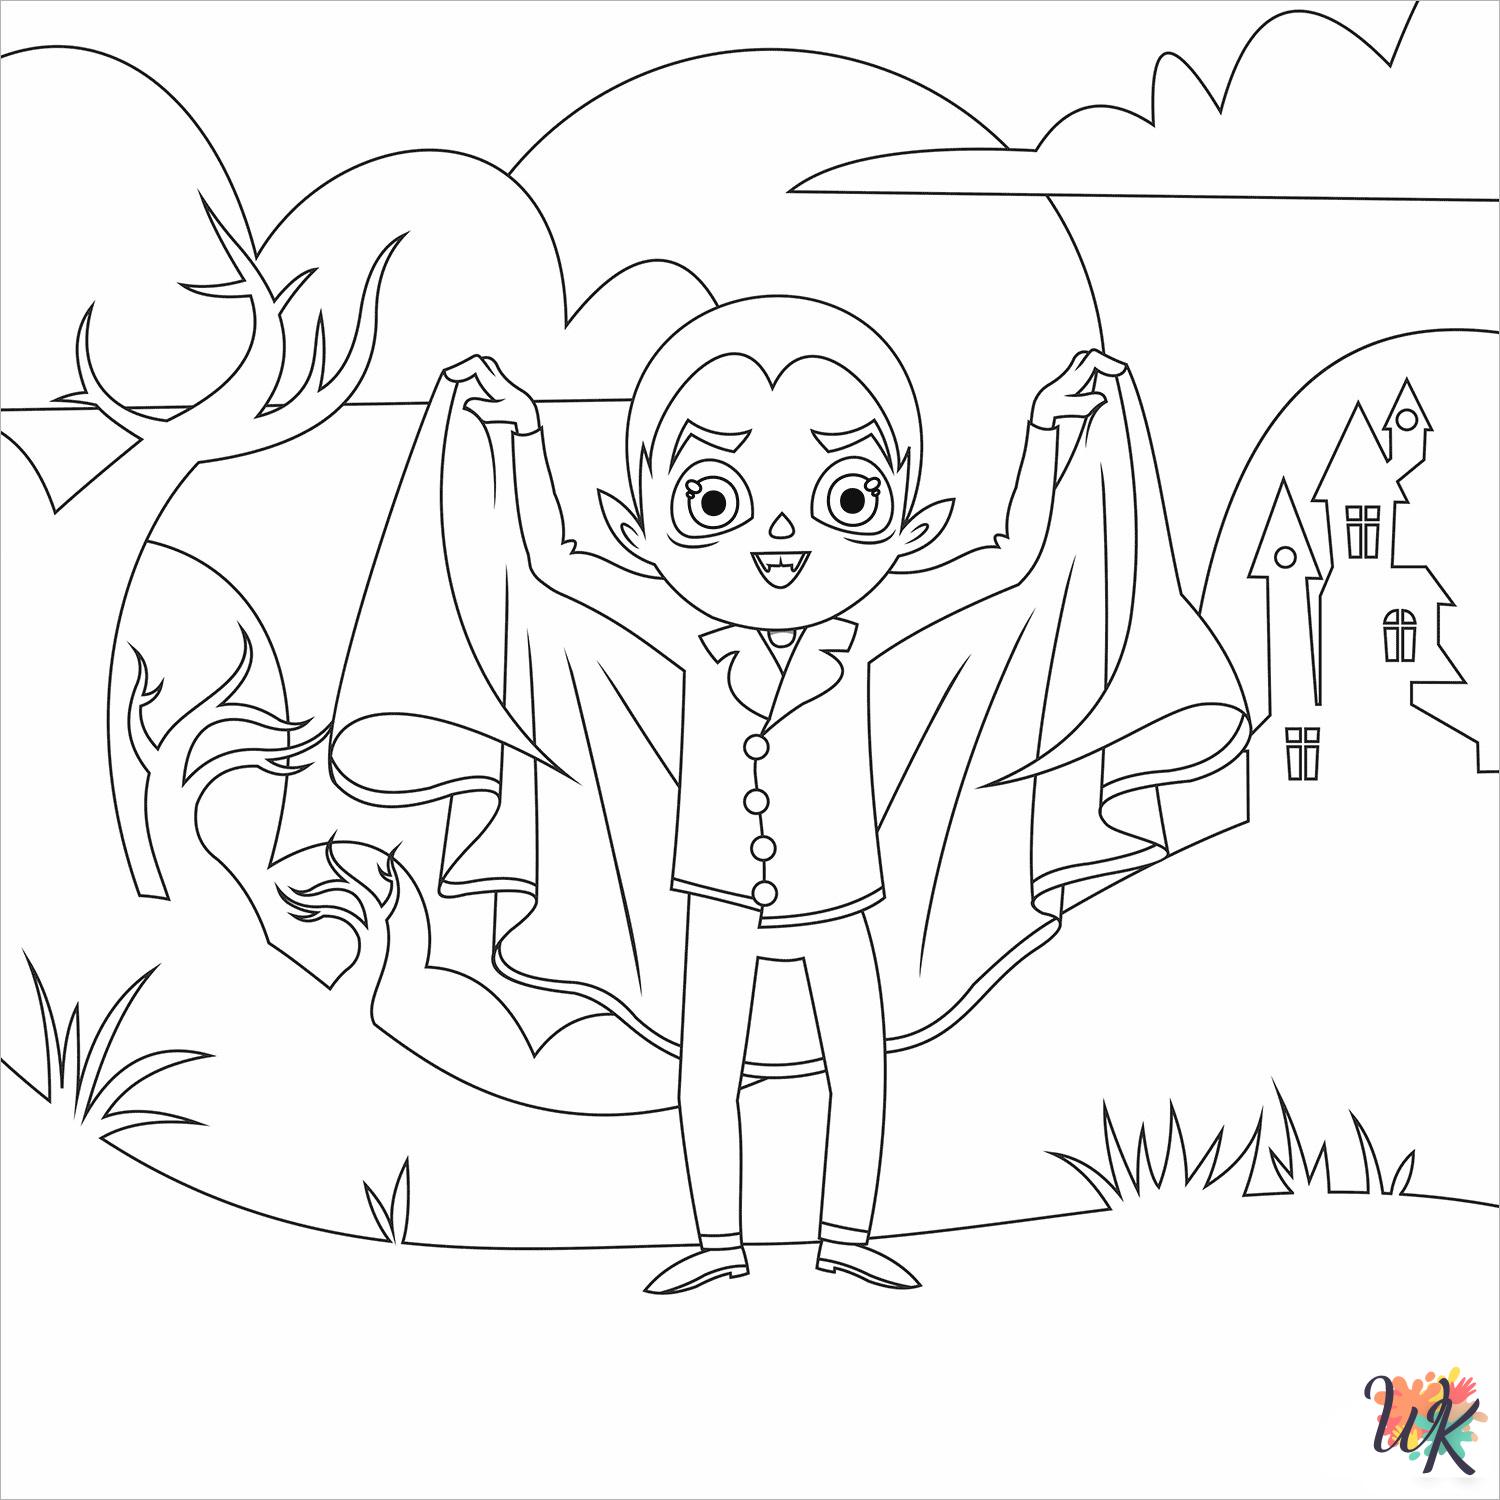 Dracula coloring pages pdf